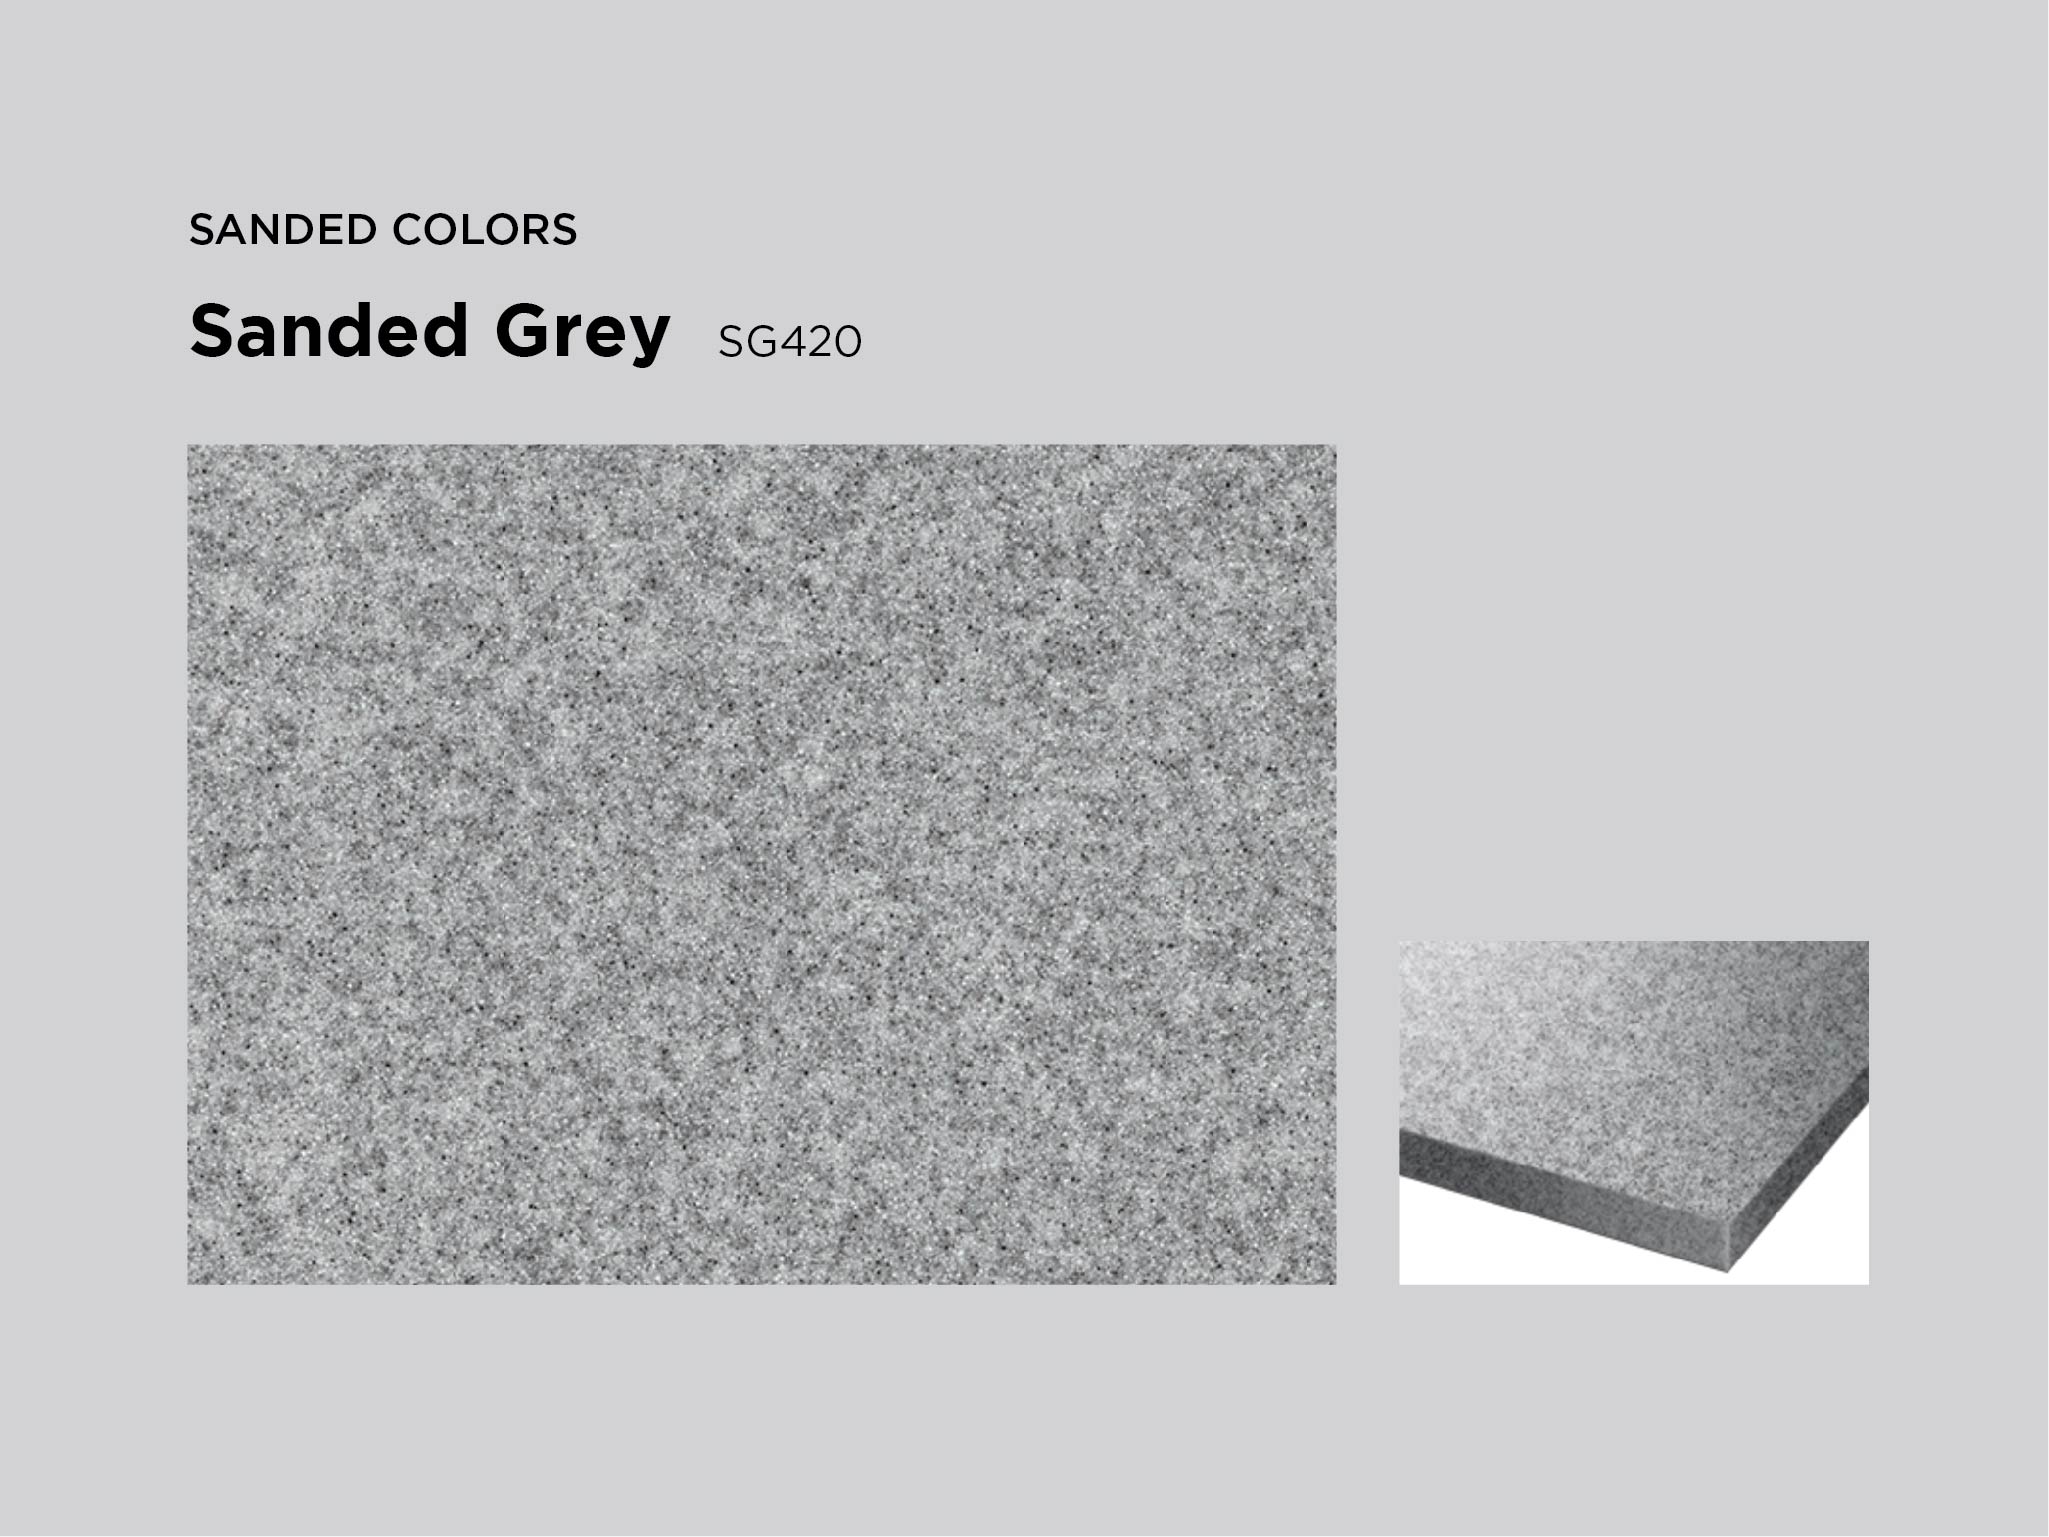 sanded-grey-isi